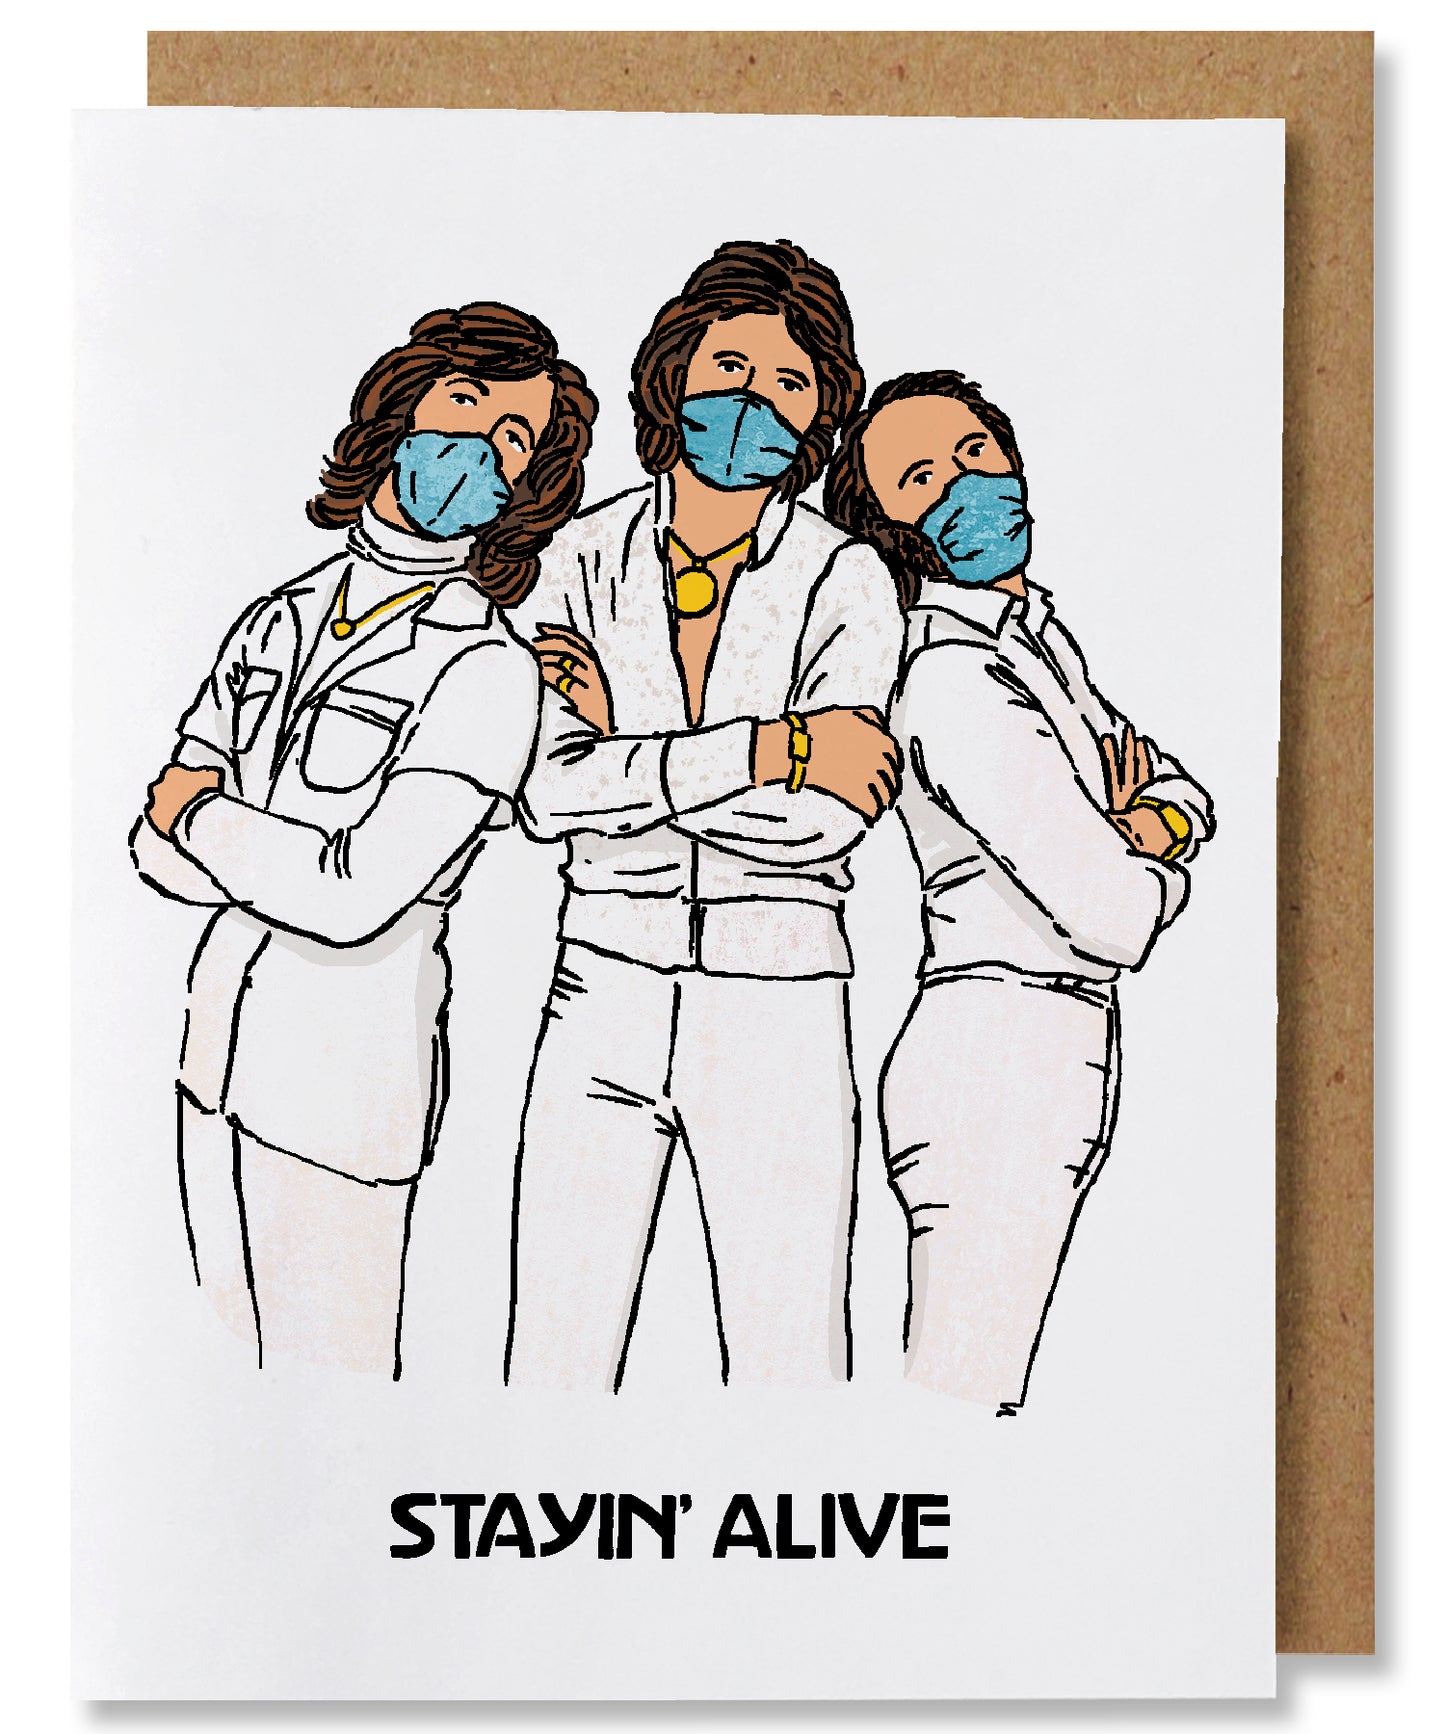 Stayin' Alive - White ground greeting card featuring The Bee Gees in white outfits wearing blue masks, standing shoulder to shoulder. The words "stayin' alive" is written below them